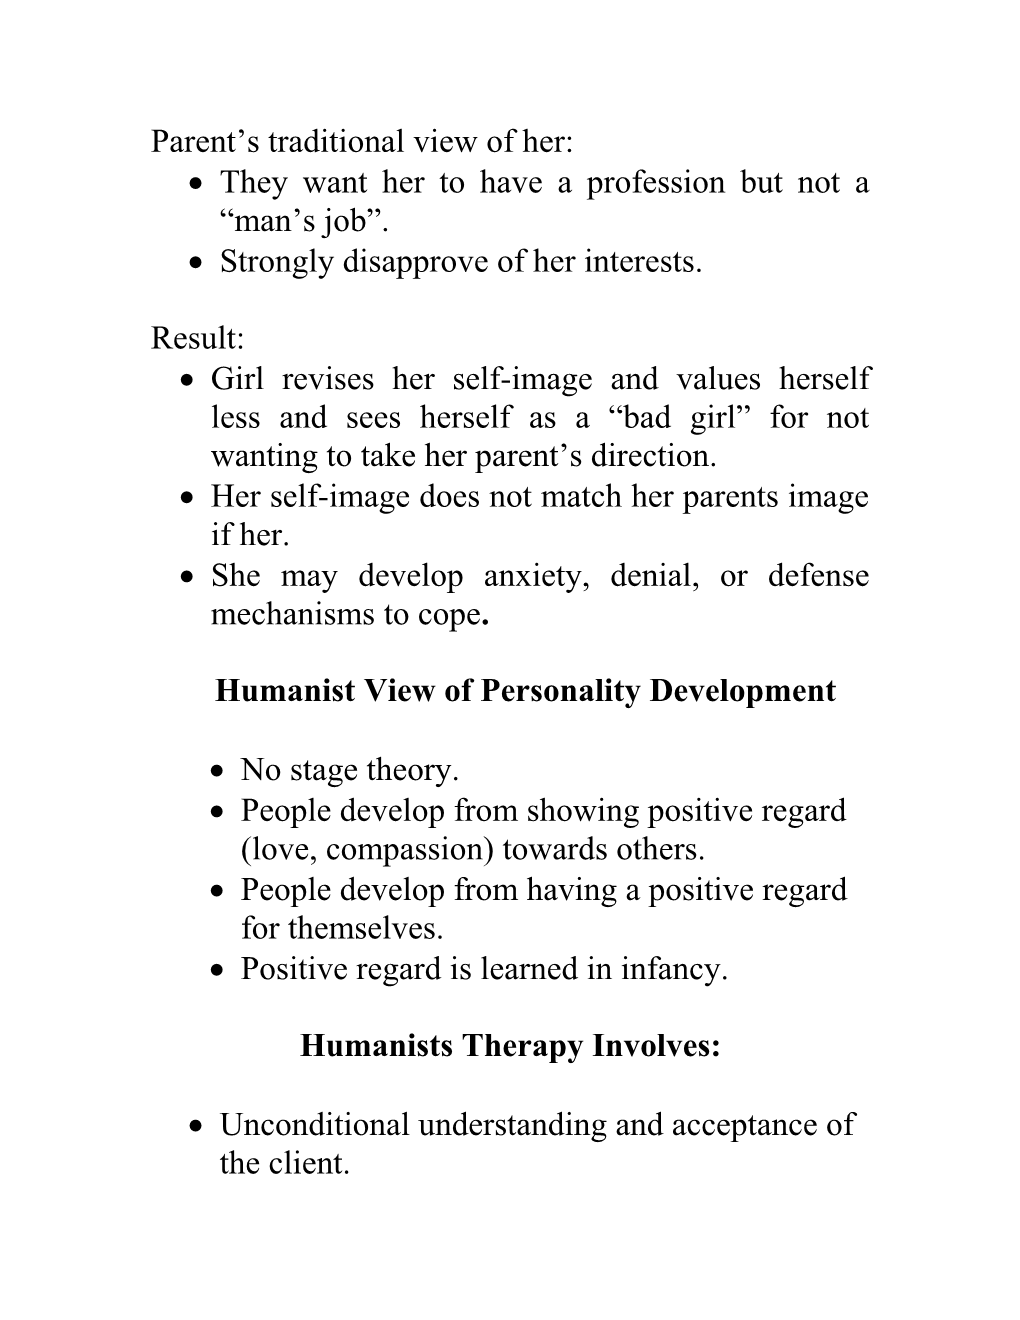 Carl Rogers and the Humanistic Approach to Personality